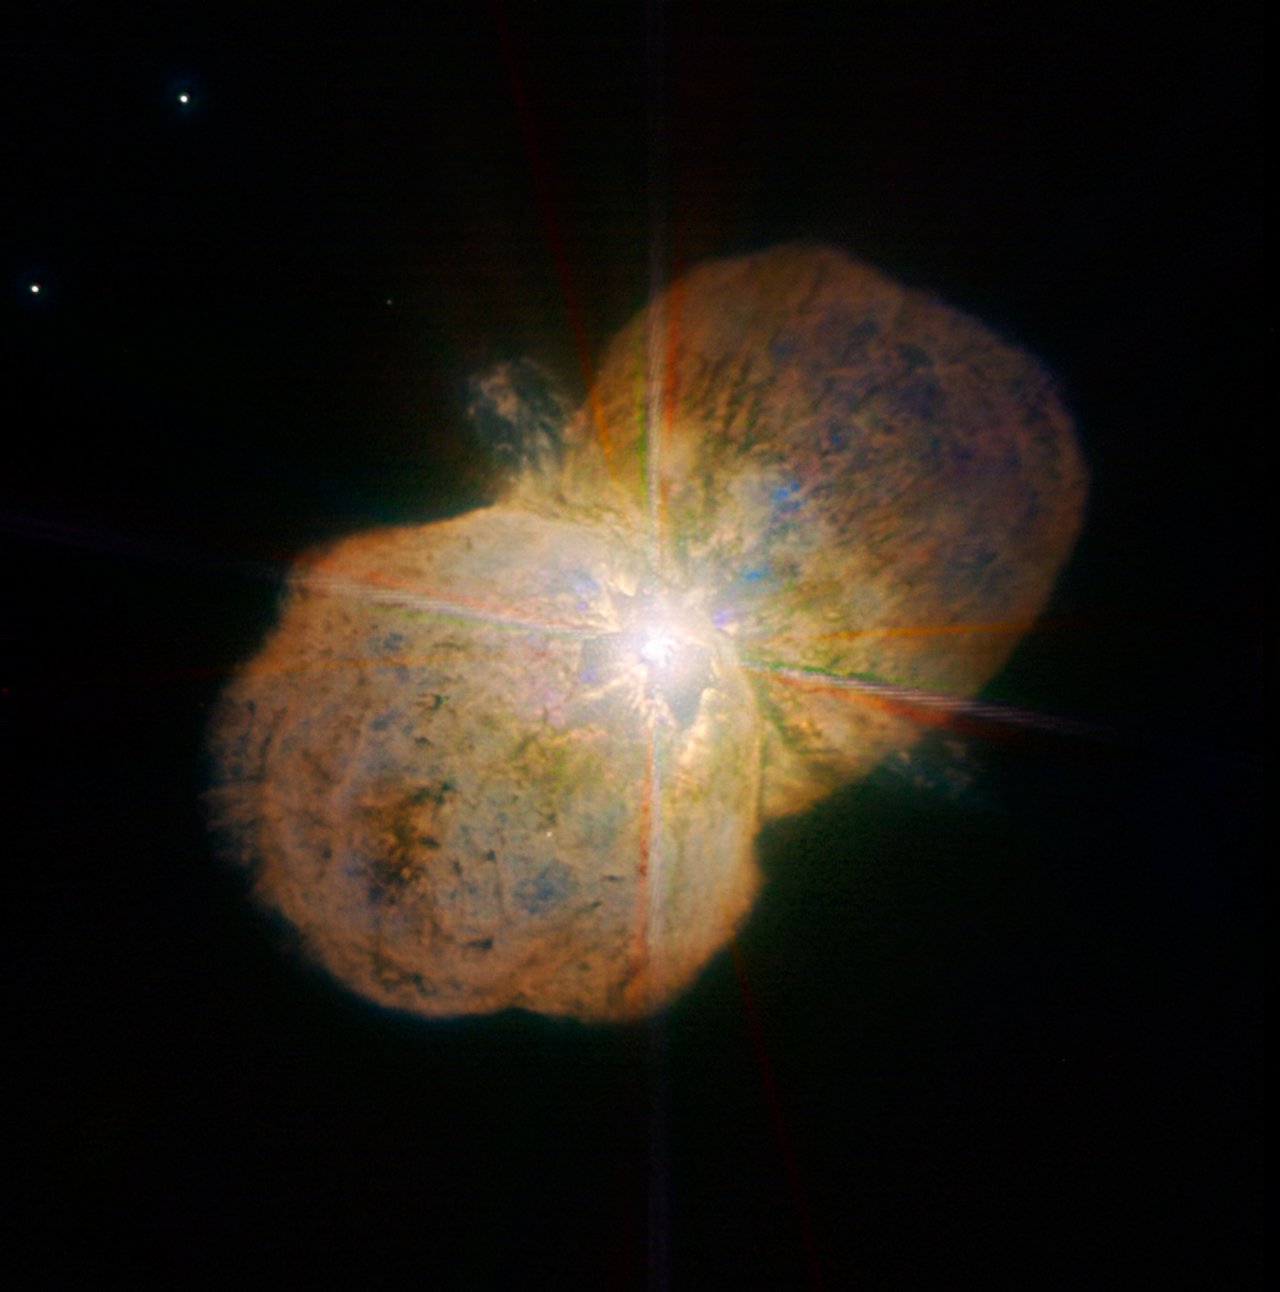 Eta Carinae: An Explosive Star System in HD Images